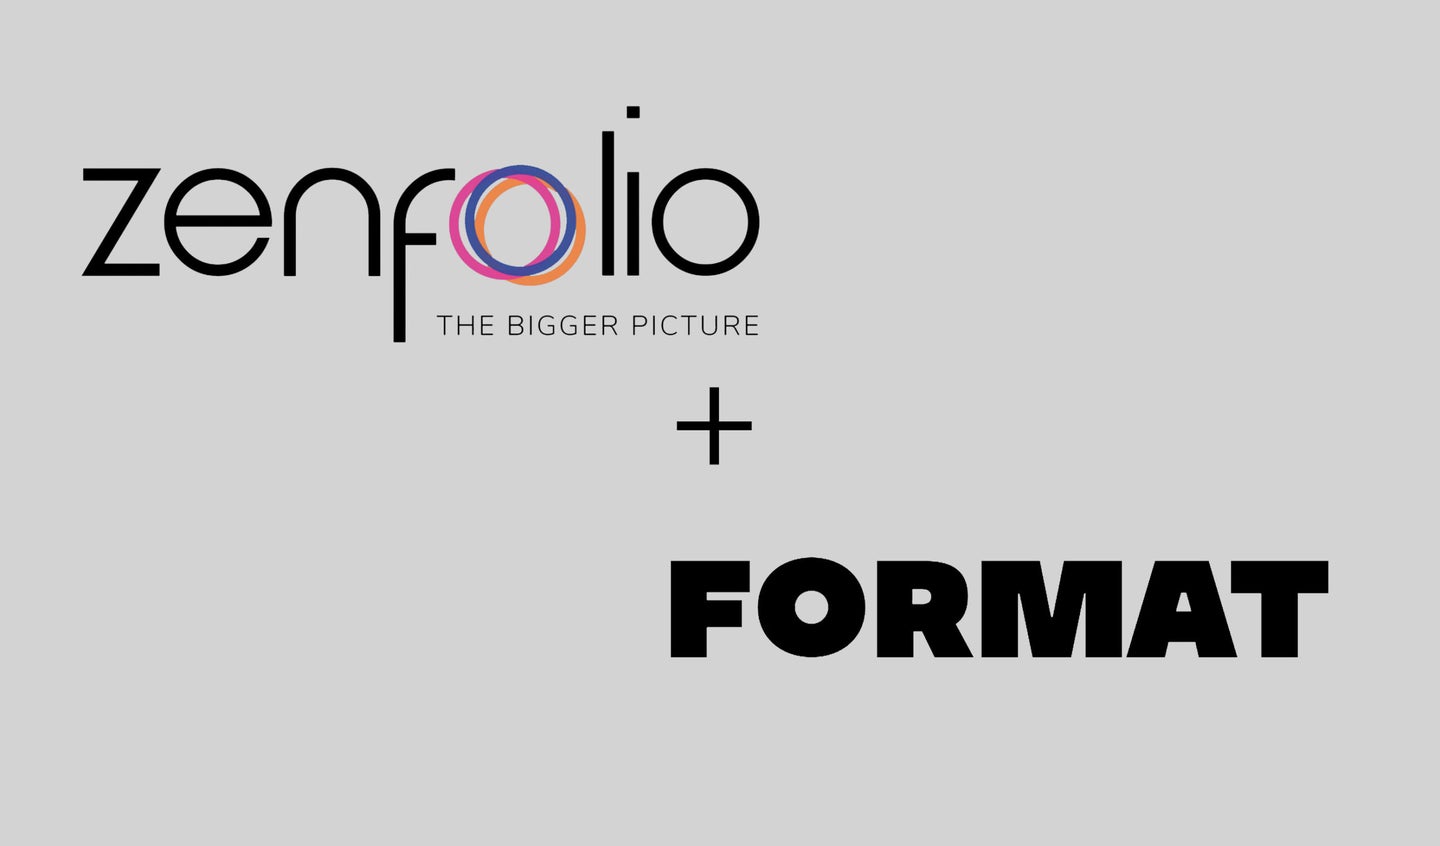 The Zenfolio and Format logos